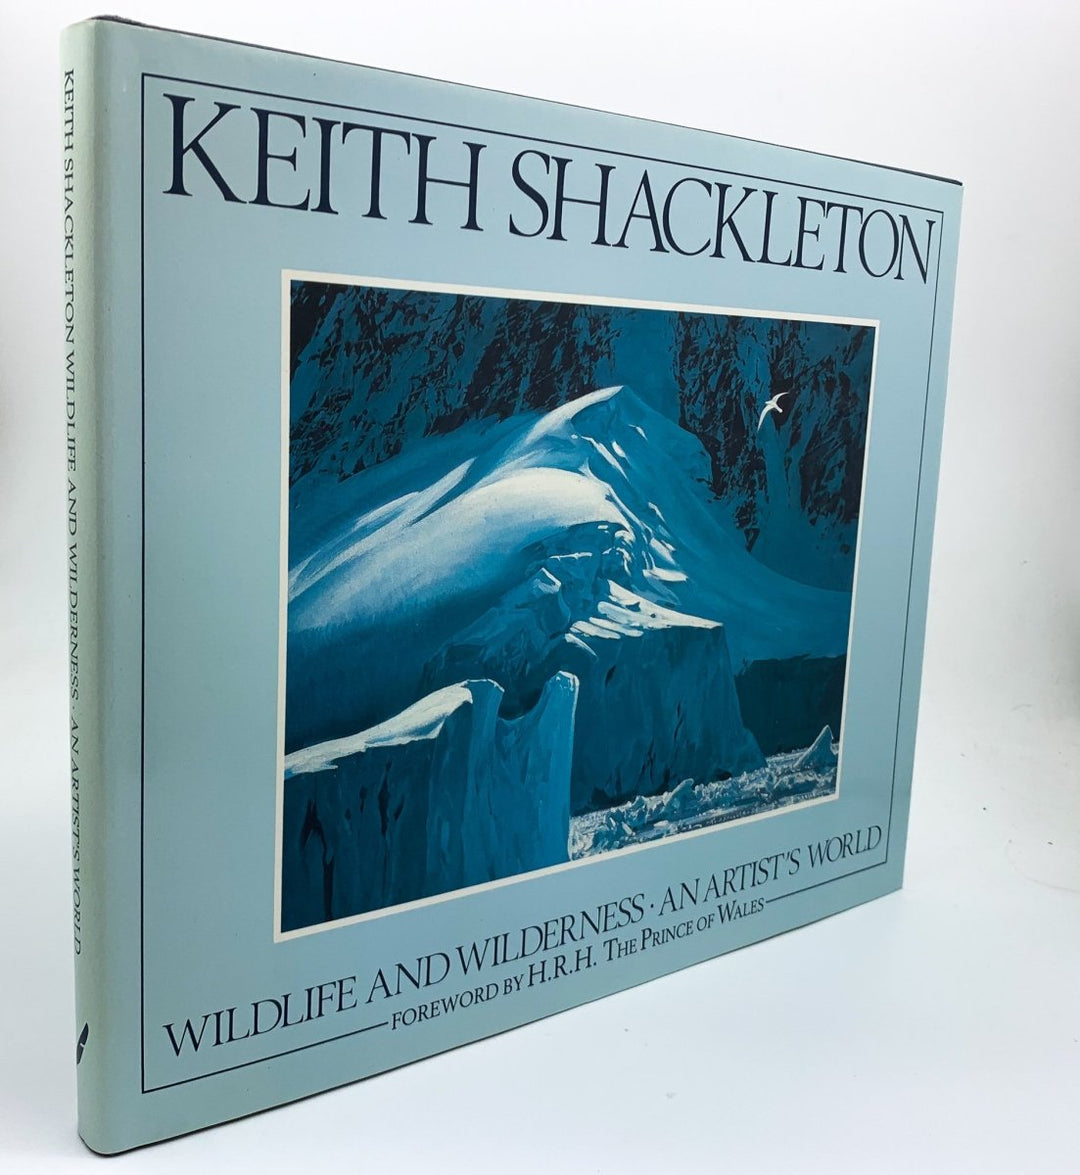 Shackleton, Keith - Wildlife and Wilderness : An Artists World - SIGNED | front cover